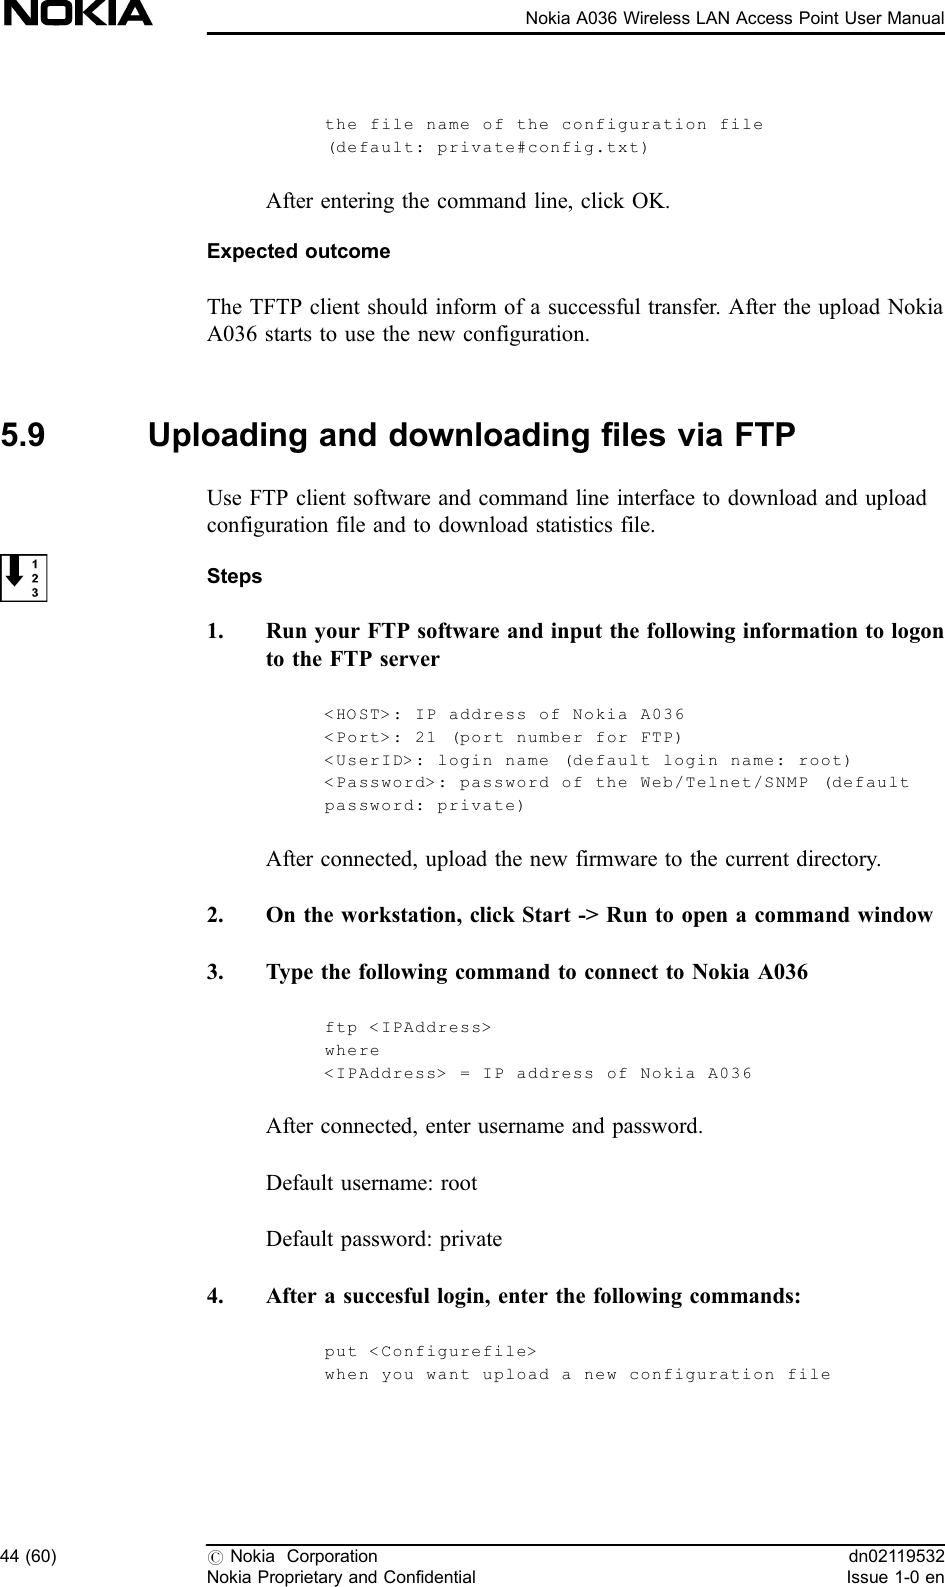 the file name of the configuration file(default: private#config.txt)After entering the command line, click OK.Expected outcomeThe TFTP client should inform of a successful transfer. After the upload NokiaA036 starts to use the new configuration.5.9 Uploading and downloading files via FTPUse FTP client software and command line interface to download and uploadconfiguration file and to download statistics file.Steps1. Run your FTP software and input the following information to logonto the FTP server&lt;HOST&gt;: IP address of Nokia A036&lt;Port&gt;: 21 (port number for FTP)&lt;UserID&gt;: login name (default login name: root)&lt;Password&gt;: password of the Web/Telnet/SNMP (defaultpassword: private)After connected, upload the new firmware to the current directory.2. On the workstation, click Start -&gt; Run to open a command window3. Type the following command to connect to Nokia A036ftp &lt;IPAddress&gt;where&lt;IPAddress&gt; = IP address of Nokia A036After connected, enter username and password.Default username: rootDefault password: private4. After a succesful login, enter the following commands:put &lt;Configurefile&gt;when you want upload a new configur ation file44 (60) #Nokia CorporationNokia Proprietary and Confidentialdn02119532Issue 1-0 enNokia A036 Wireless LAN Access Point User Manual